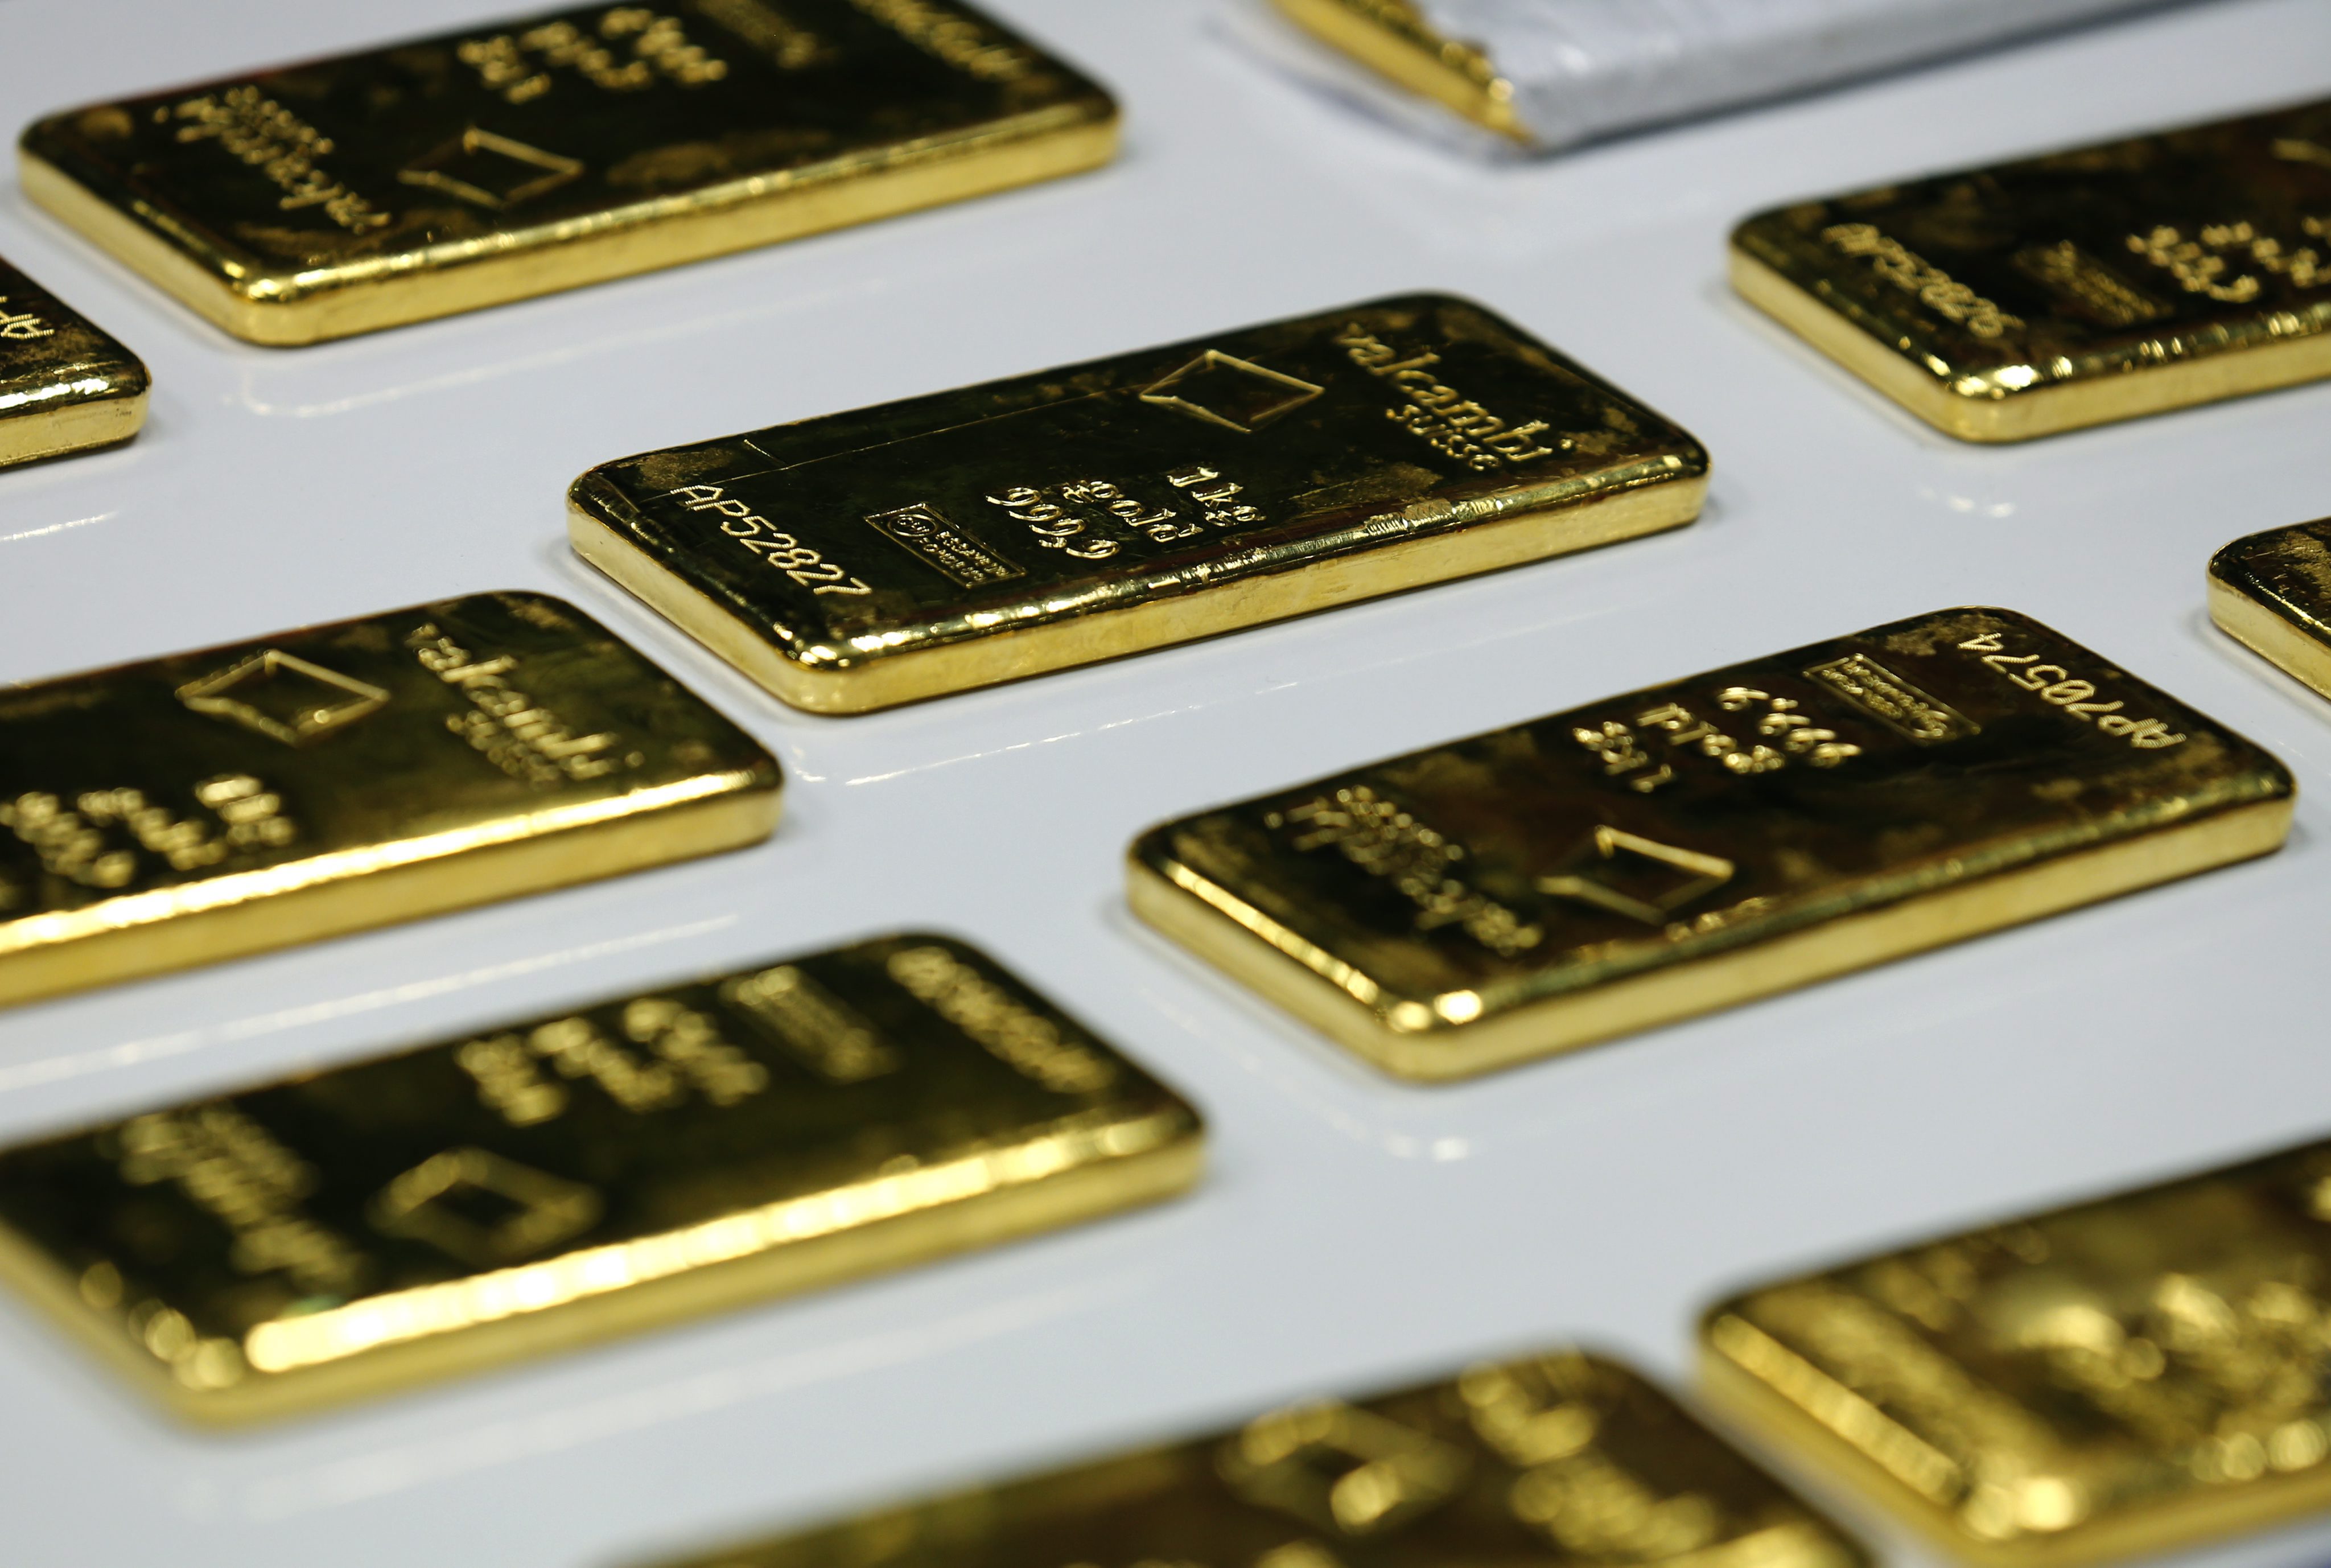 The London gold fix provides a reference price for traders around the world. Photo: EPA